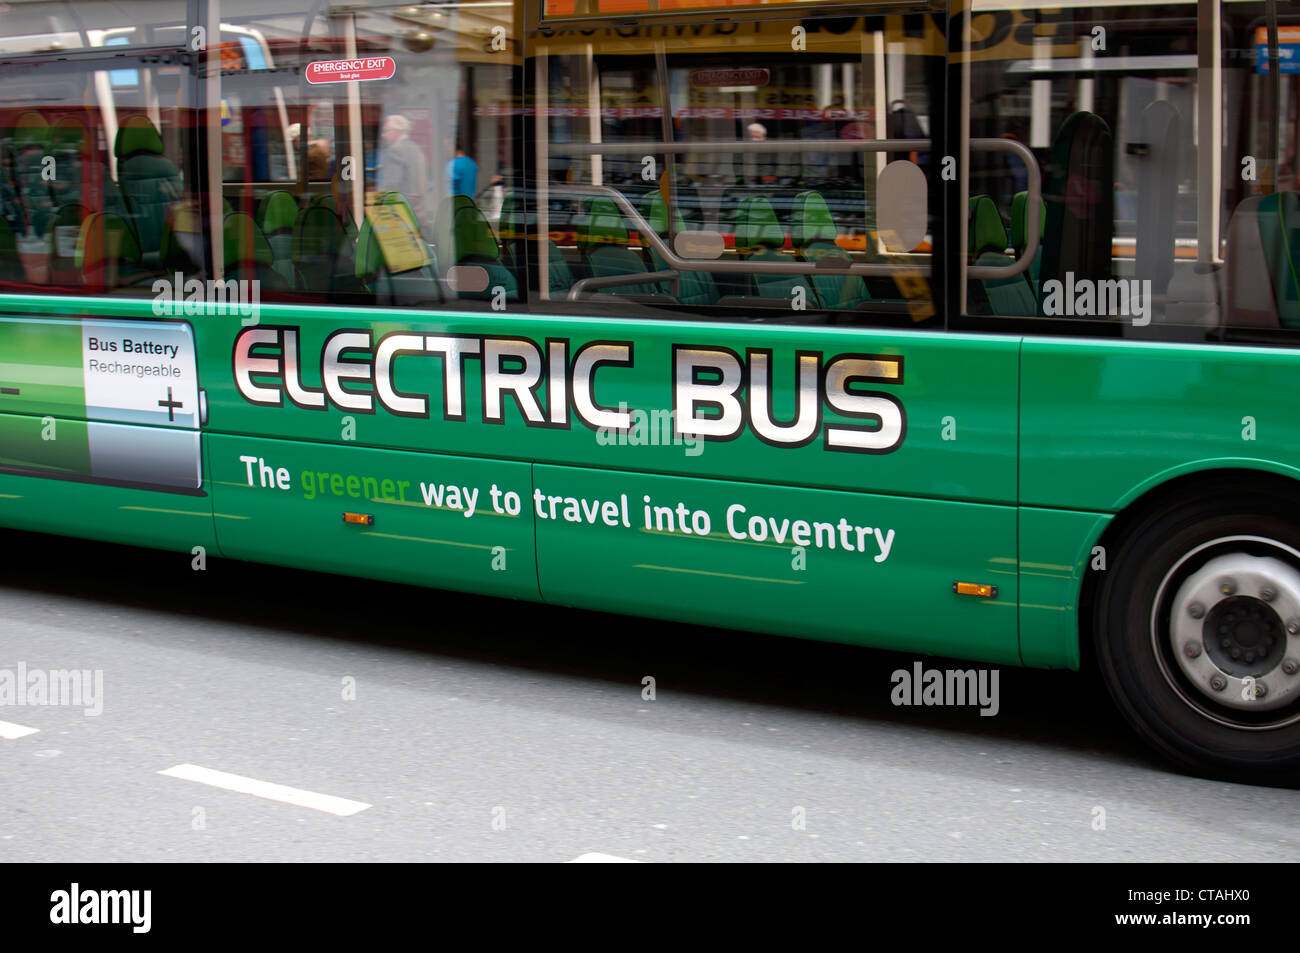 Electric bus in Coventry city centre, UK Stock Photo